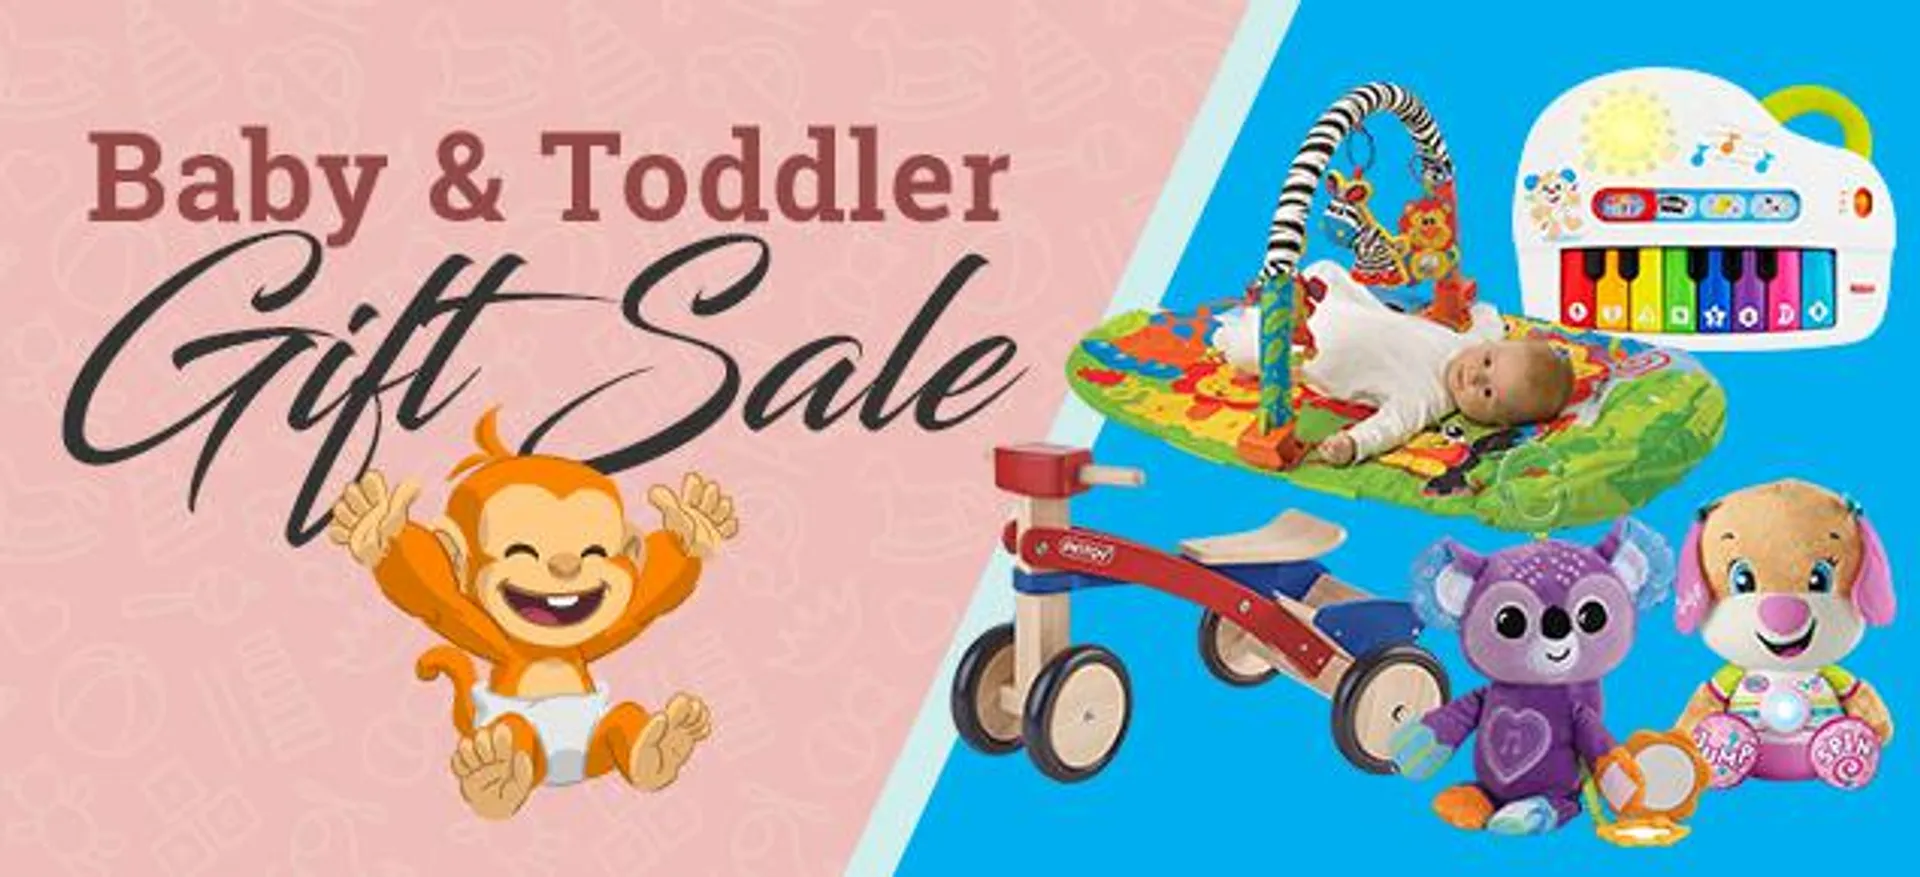 Baby & Toddler Gift Sale